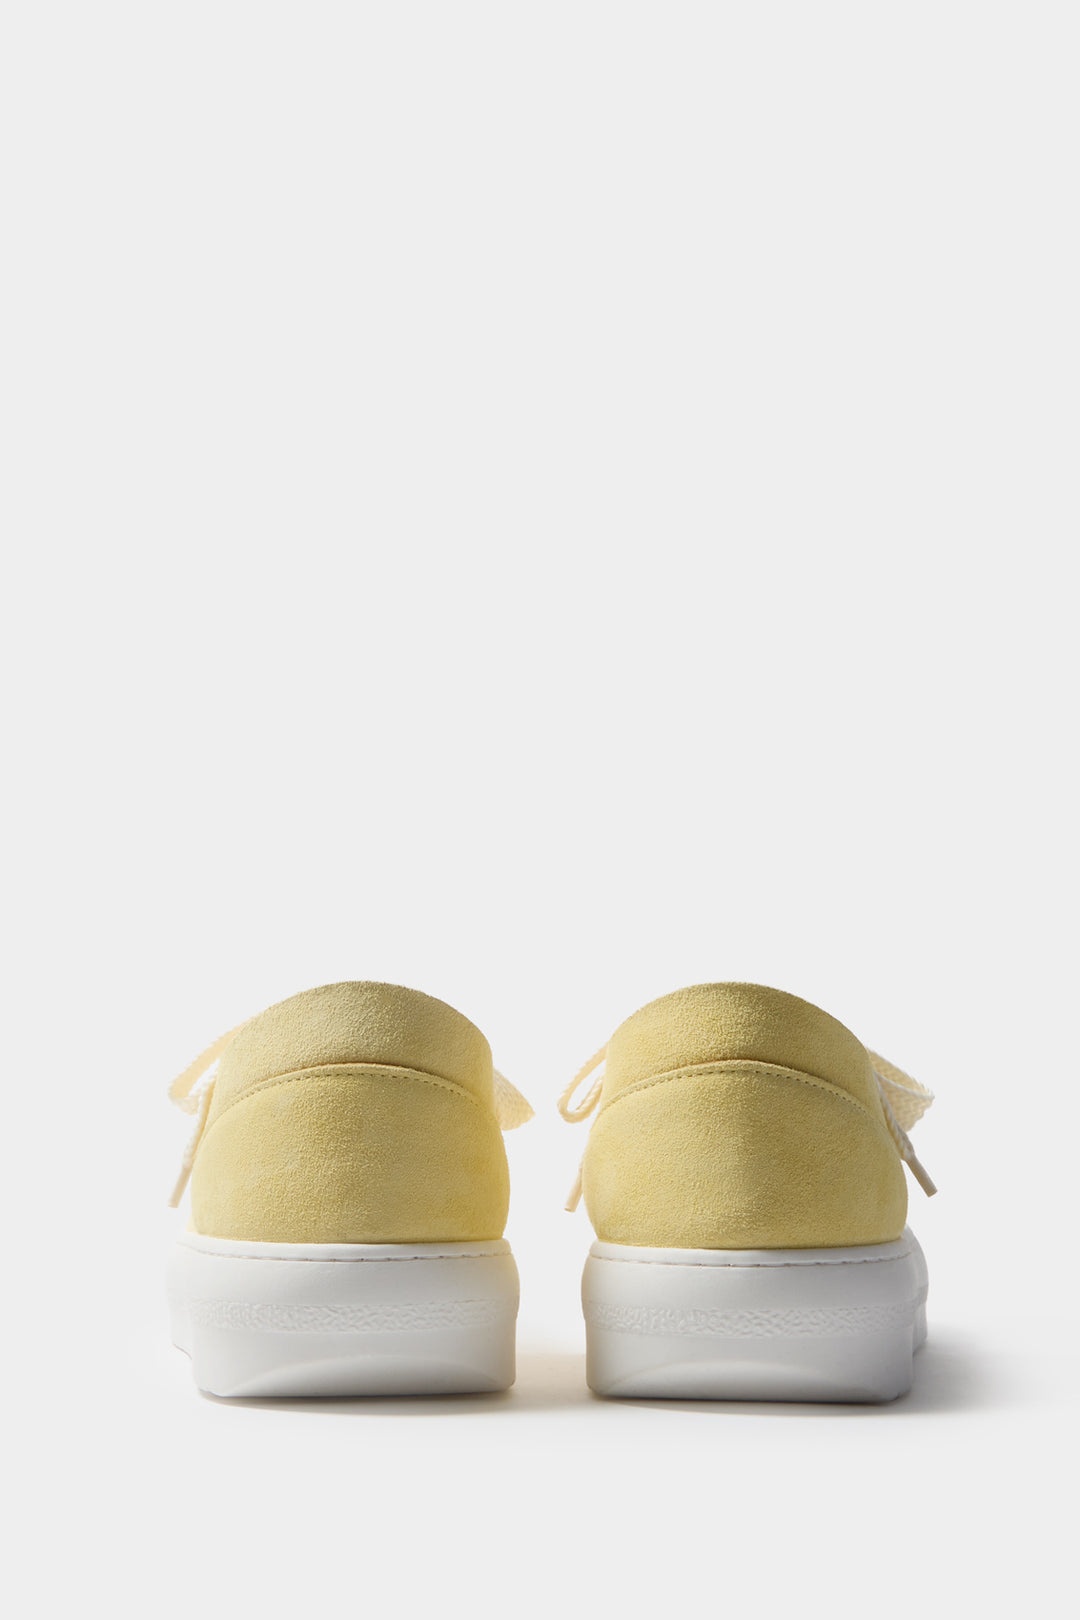 DREAMY SHOES / suede / light yellow - 3